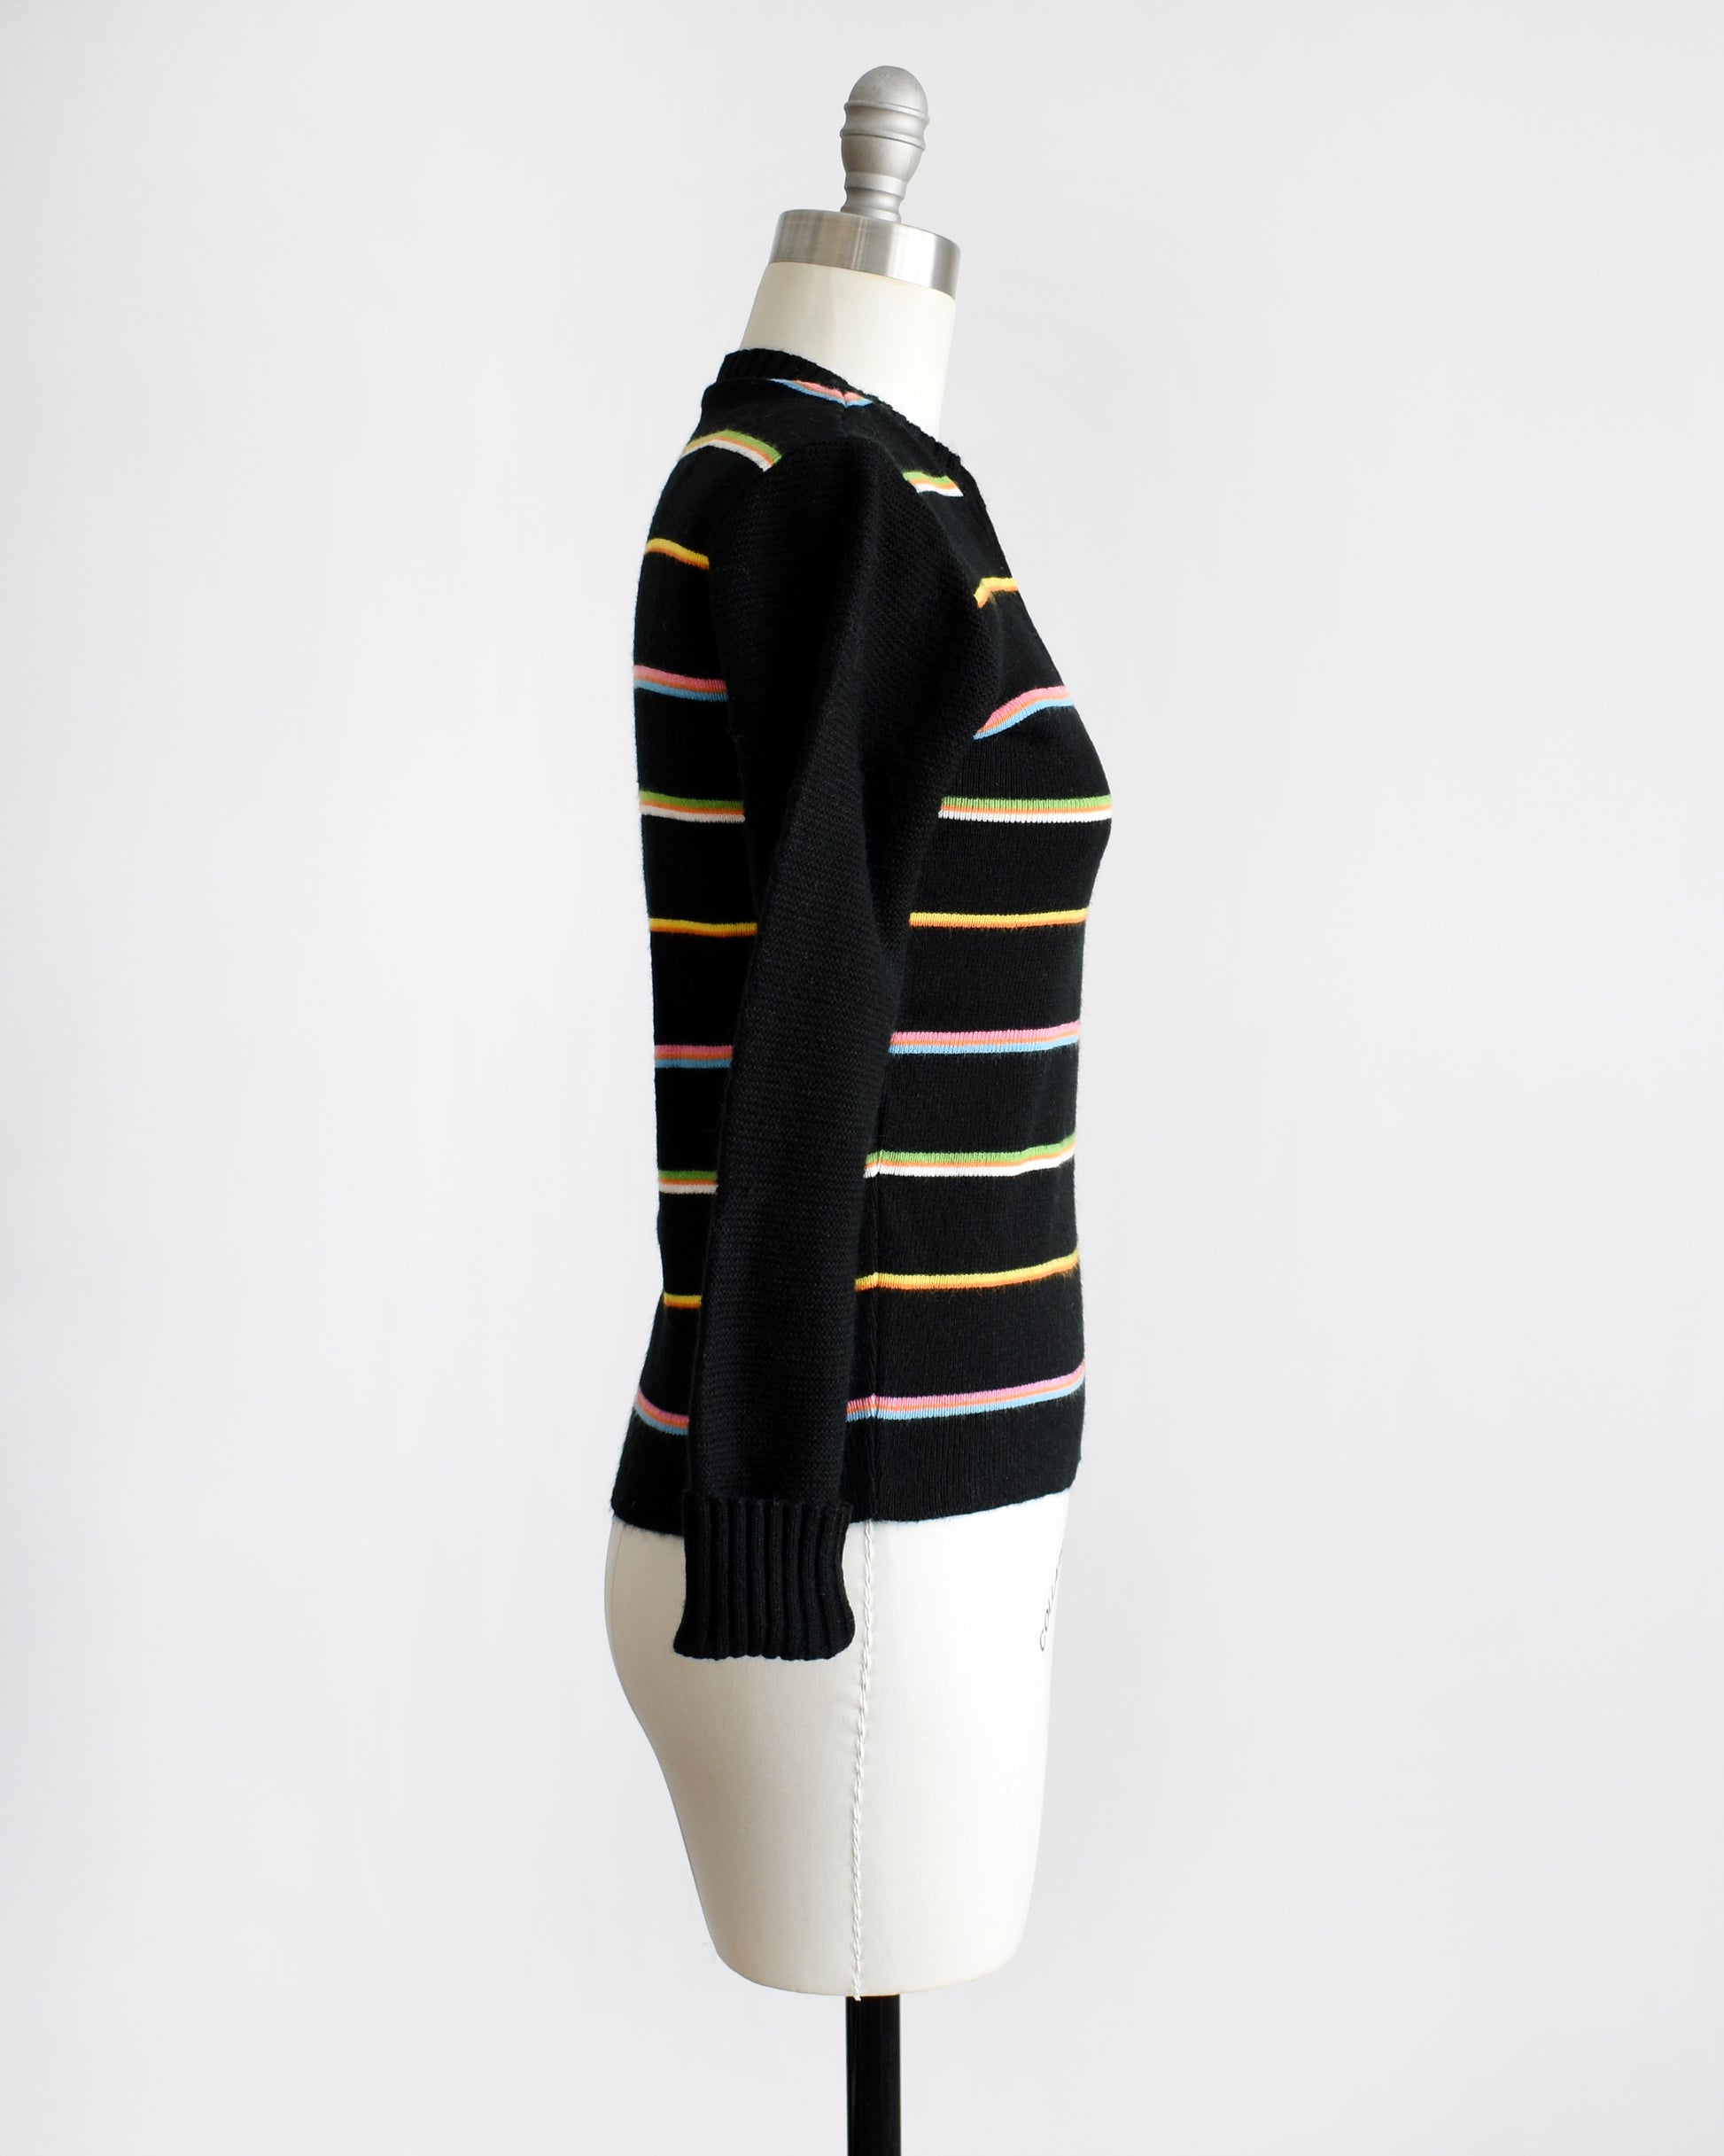 Side view of a vintage 1970s sweater that features black knit with horizontal rainbow stripes